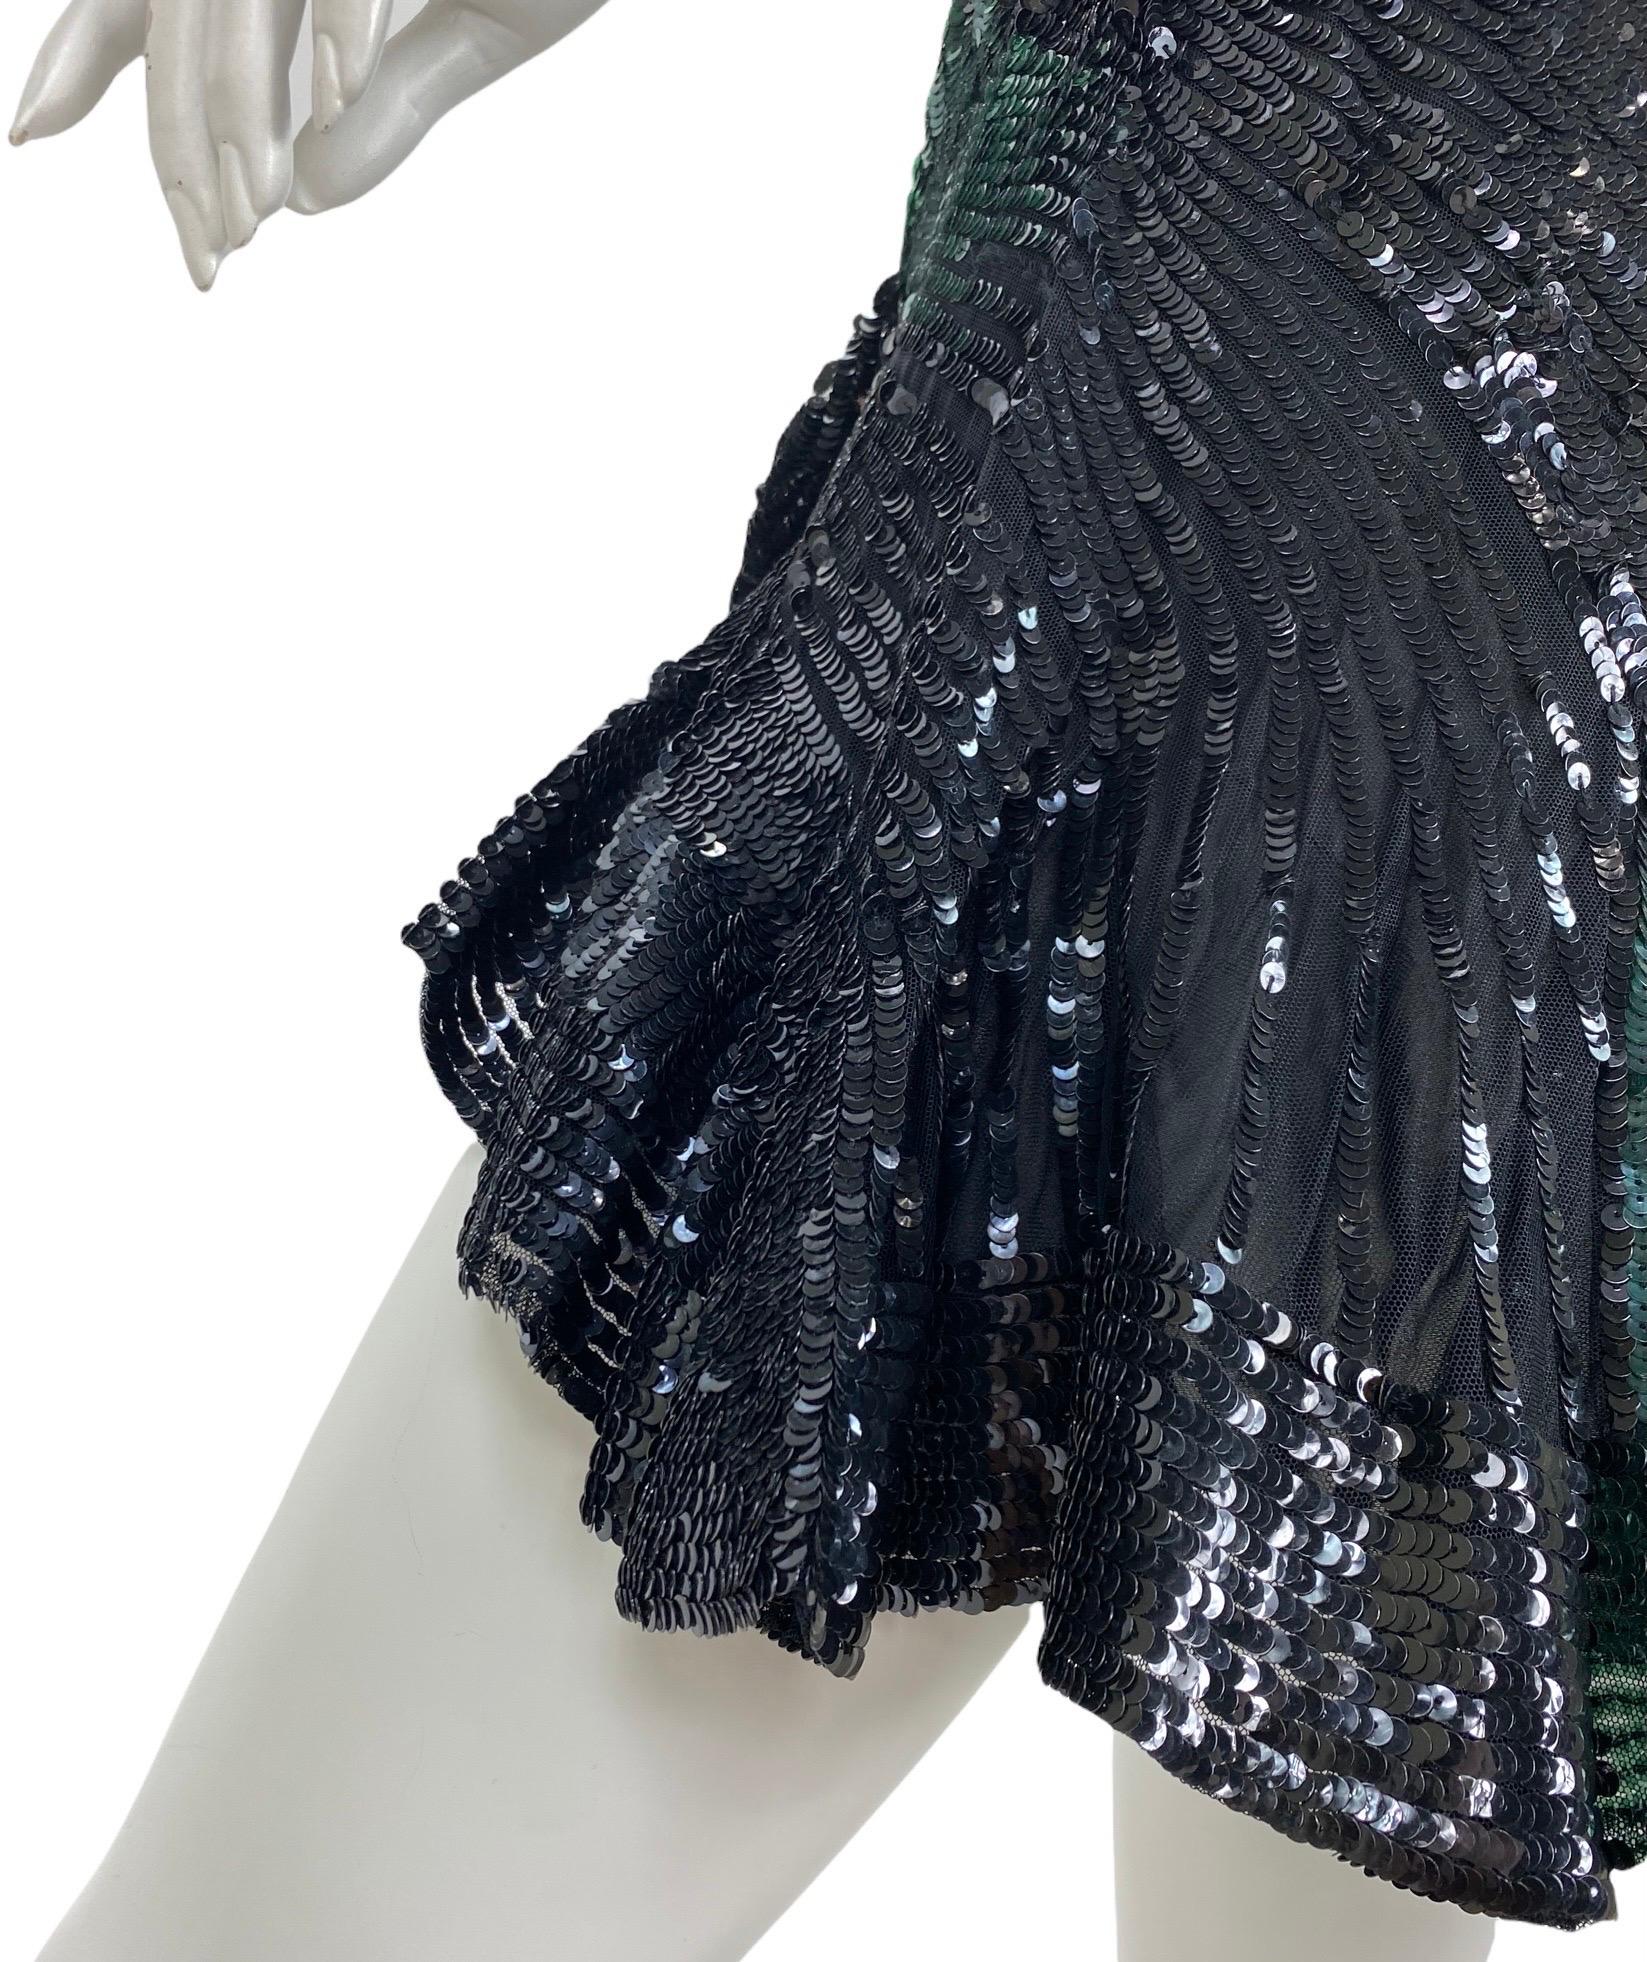  Vintage VERSACE F/W 2005 Embellished Black Emerald Mini Cocktail Dress 42 US 6 In Excellent Condition For Sale In Montgomery, TX